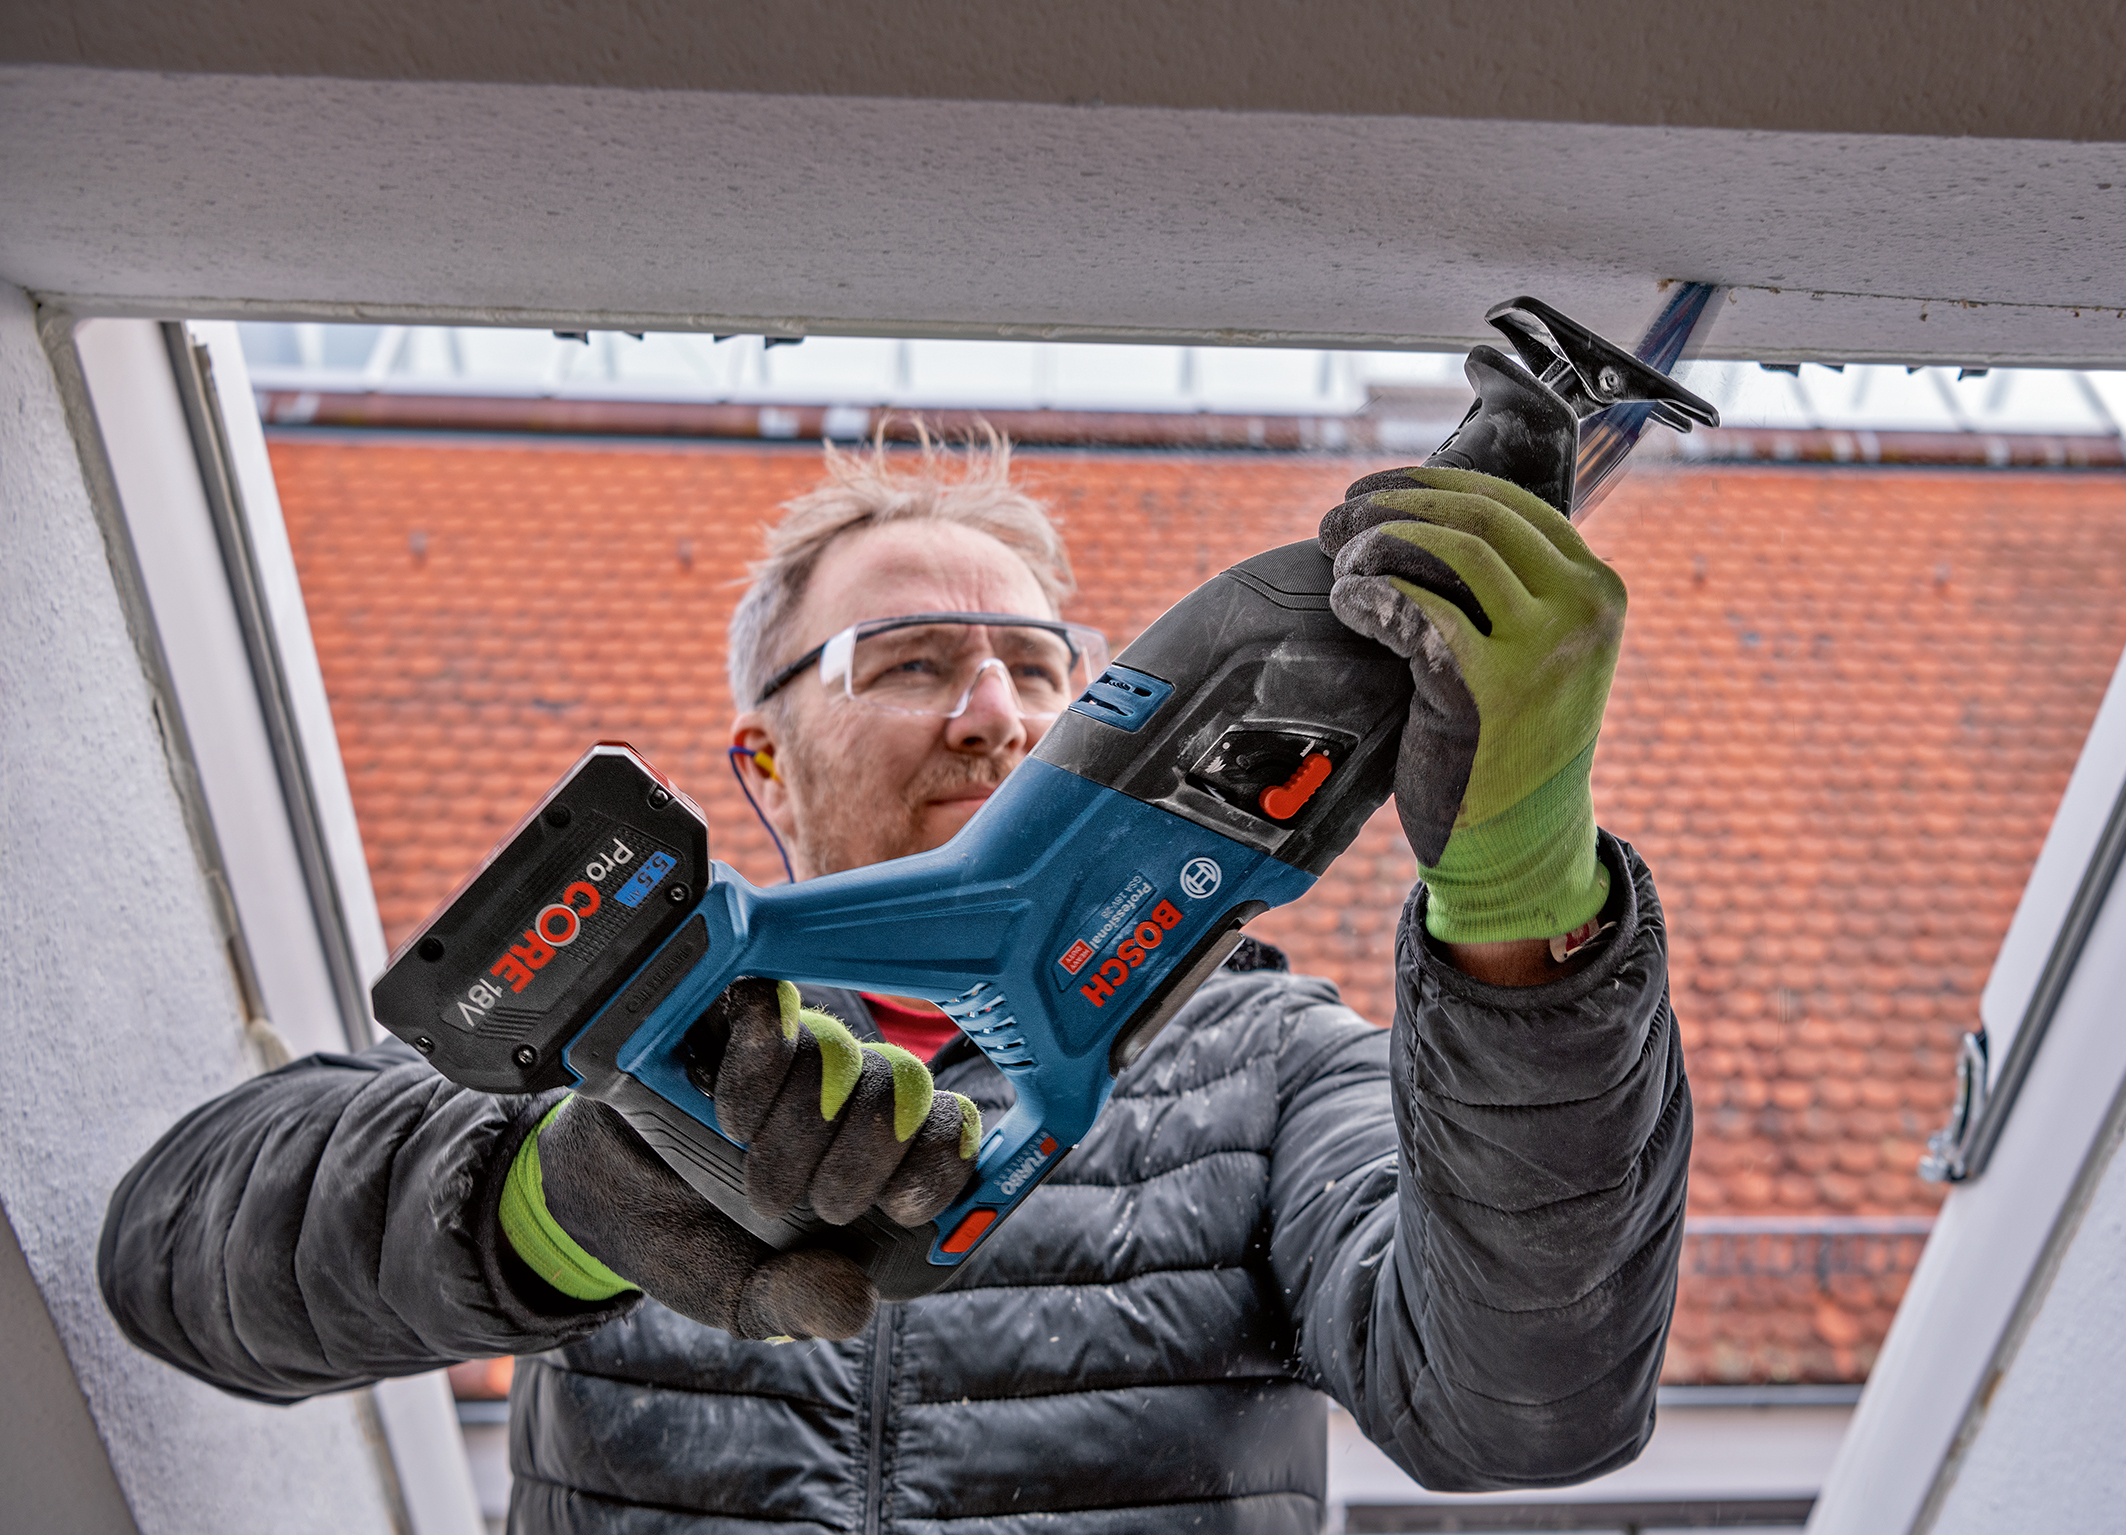 In-line design and an optimal power-to-weight ratio: Biturbo cordless reciprocating saw GSA 18V-28 Professional from Bosch